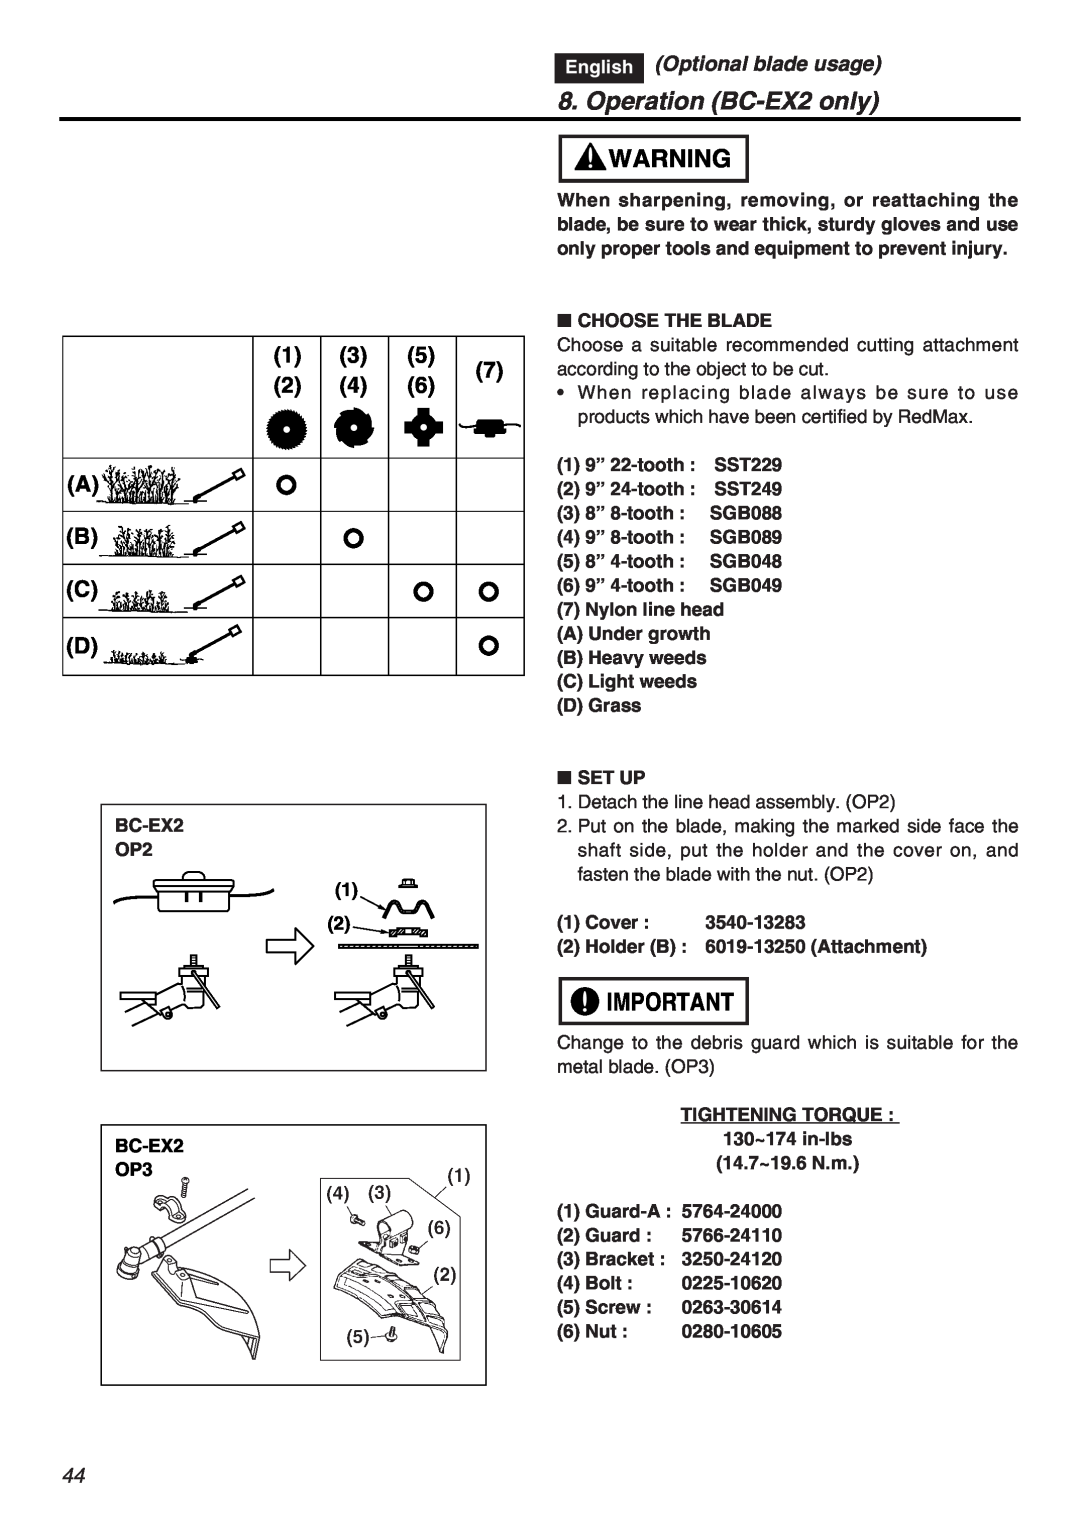 RedMax EXZ2401S-PH-CA manual English Optional blade usage, Operation BC-EX2 only, A B C D 